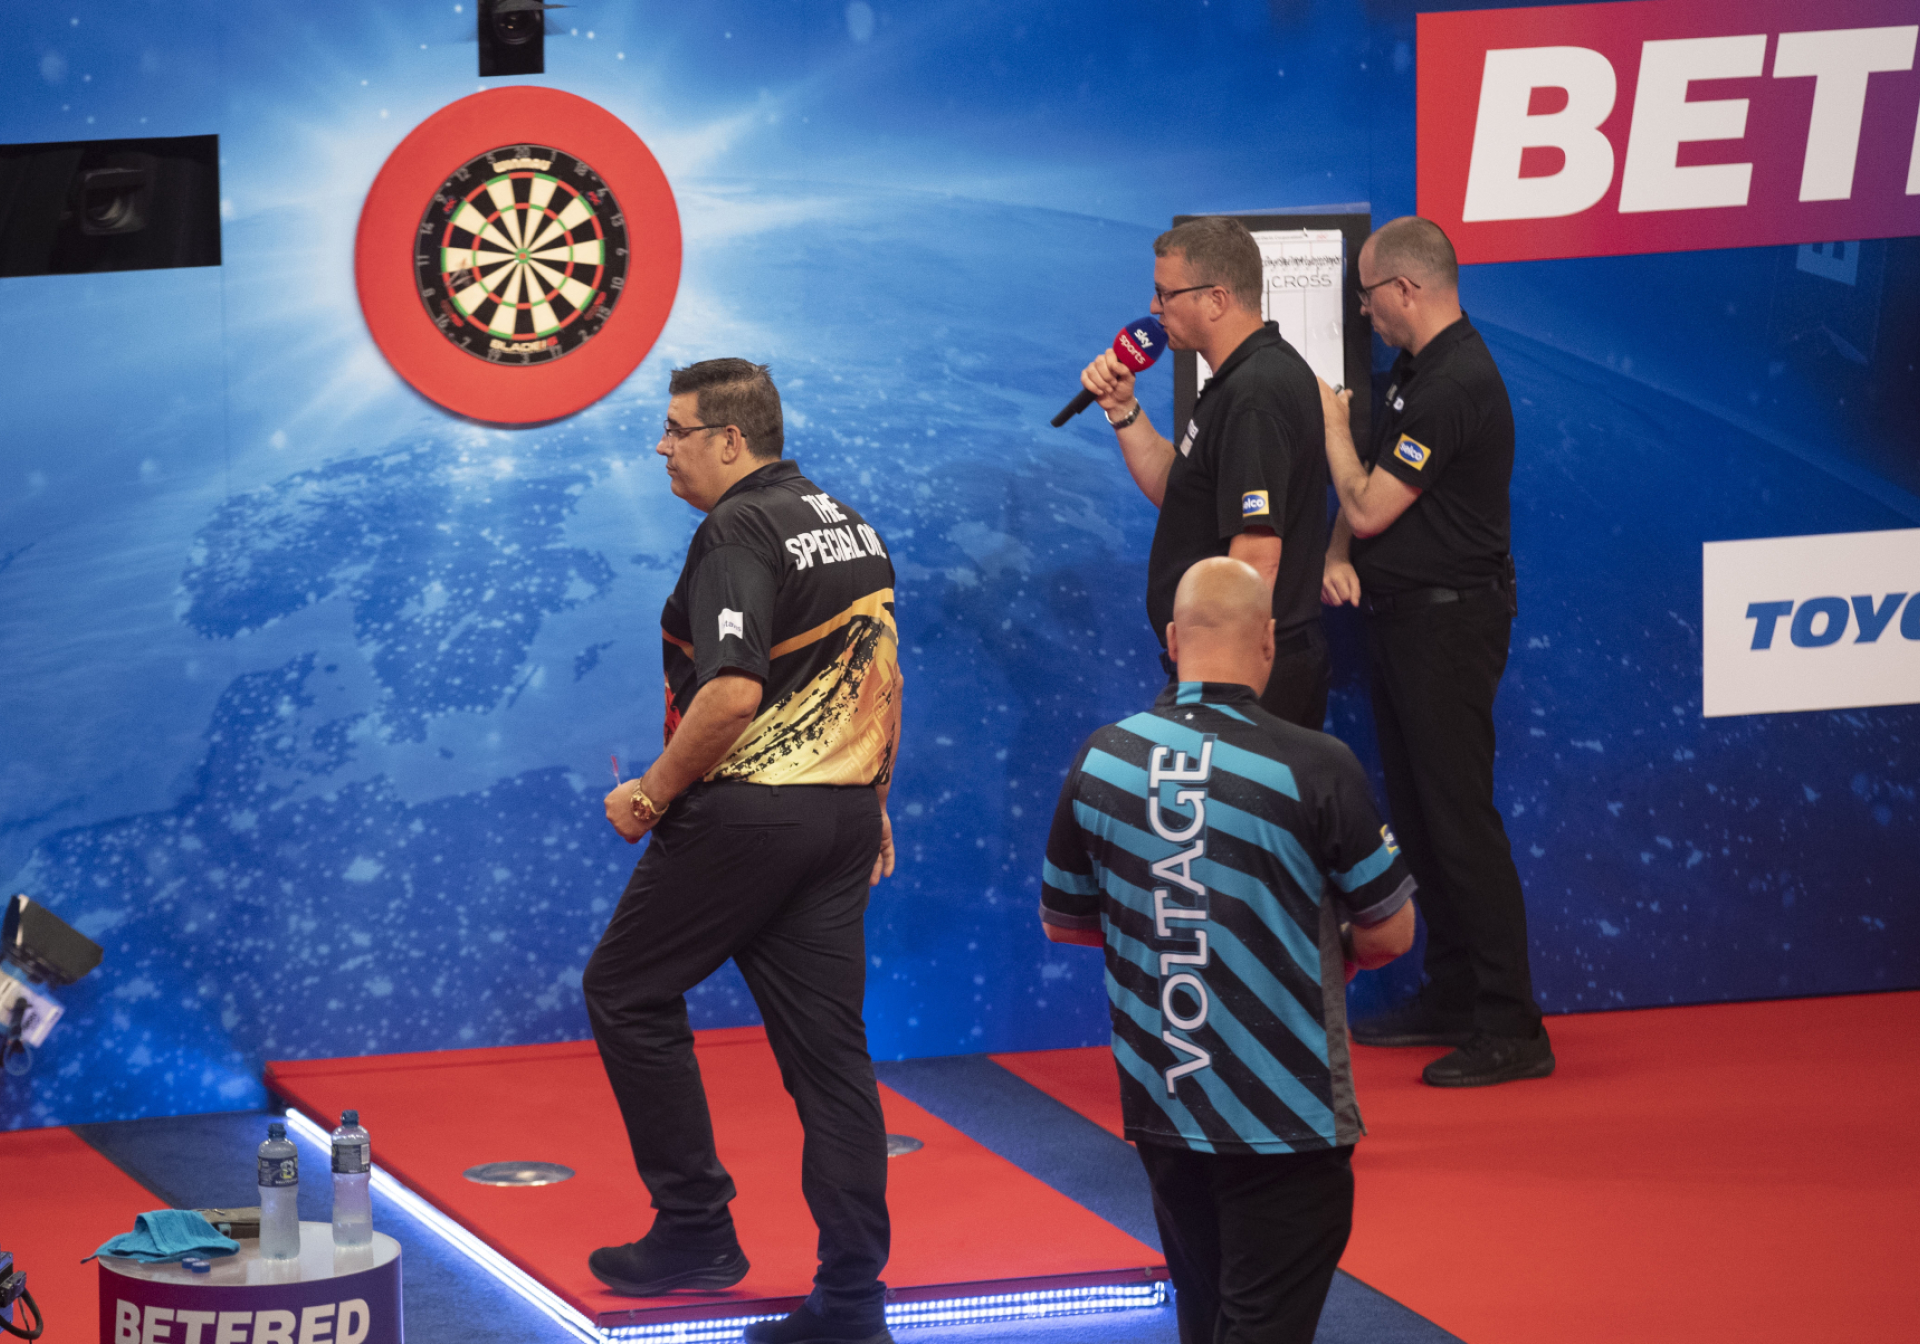 Jose de Sousa and Rob Cross on stage at the Winter Gardens